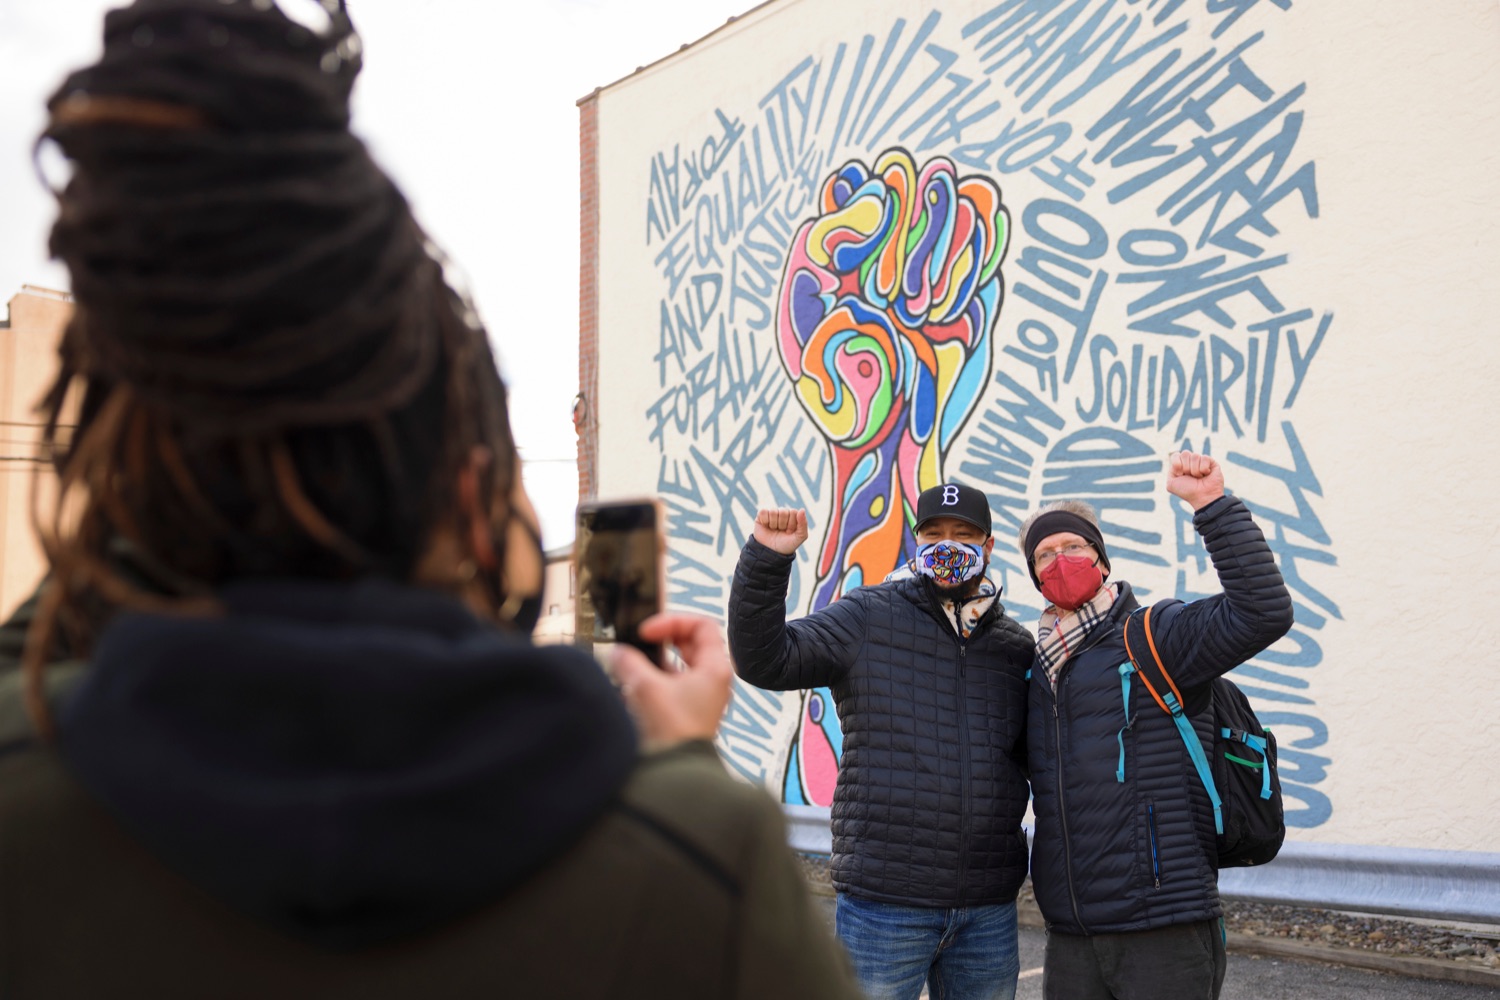 Muralist Brian Bowens, left, poses for a picture in front of his mural with poet Dr. Jeffrey Tietbohl during an event observing the "Day of Racial Healing" in Pennsylvania at Jenkintown Town Square on Tuesday, January 18, 2022. By proclamation of Governor Tom Wolf, Pennsylvania joined communities across the United States in mobilizing events and activities that support bringing racial healing into homes, communities, and institutions. This is a call to action to work together and heal the wounds of racial bias and commit to building an equitable and just society so that all residents can thrive.<br><a href="https://filesource.amperwave.net/commonwealthofpa/photo/20315_OAR_RacialHealing_NK_009.JPG" target="_blank">⇣ Download Photo</a>